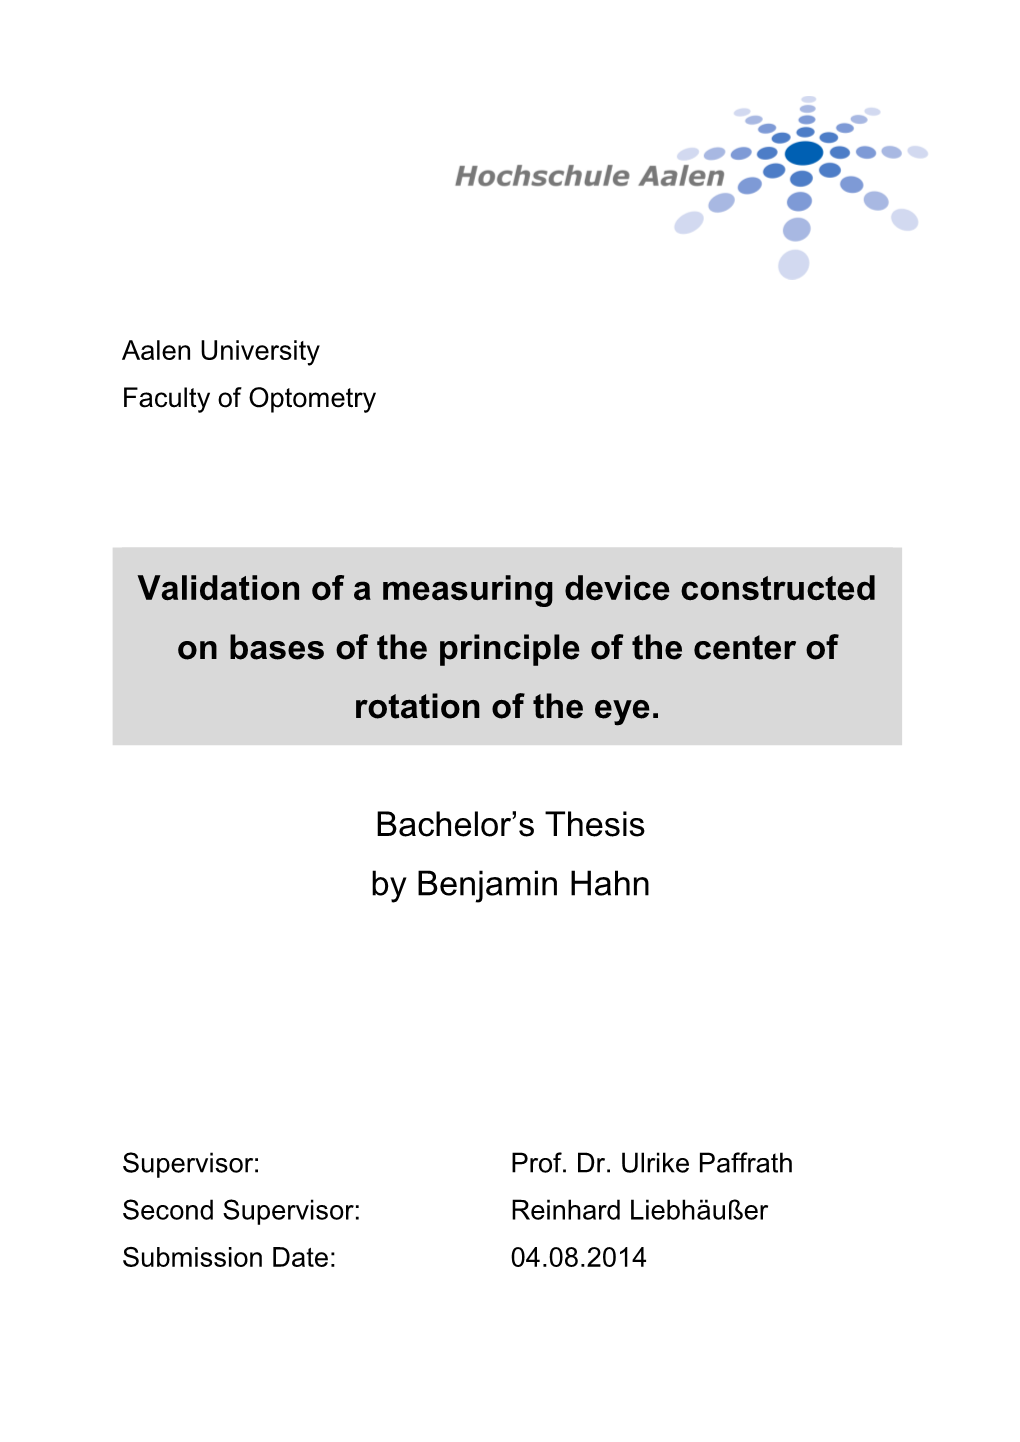 Validation of a Measuring Device Constructed on Bases of the Principle of the Center of Rotation of the Eye